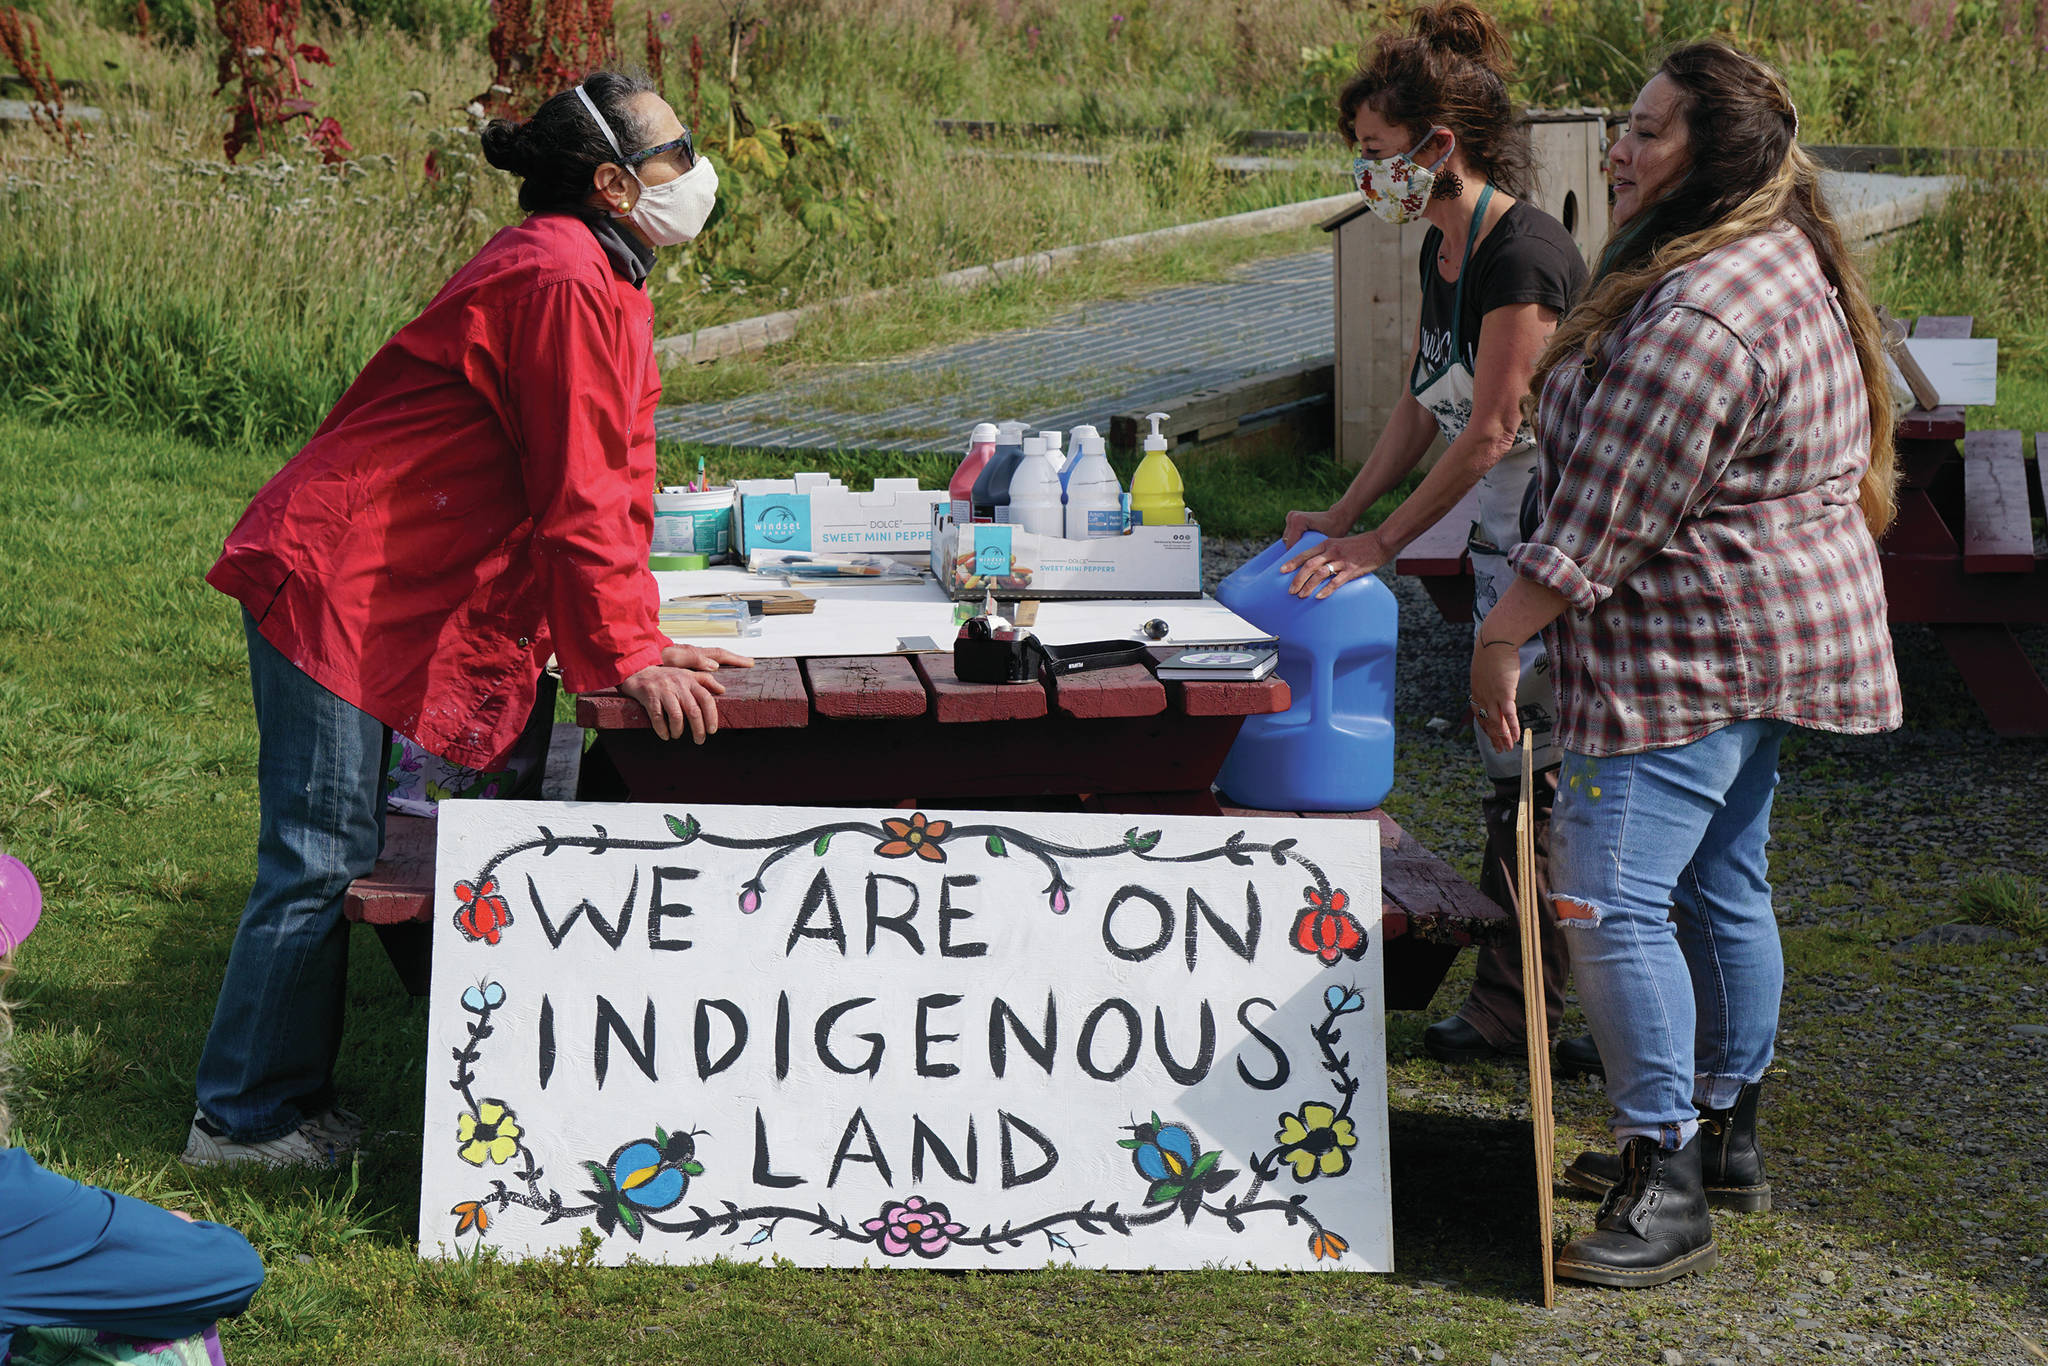 Melissa Shaginoff, right, speaks with Rika Mouw, left, and Asia Freeman, center, at “Land Acknowledgement in Action: Sign Installation” last Saturday, Aug. 22, 2020, at the Bishop’s Beach pavillion — the area known by the Dena’ina people as “Tuggeht,” or “at the water’s edge.” (Photo by Michael Armstrong/Homer News.